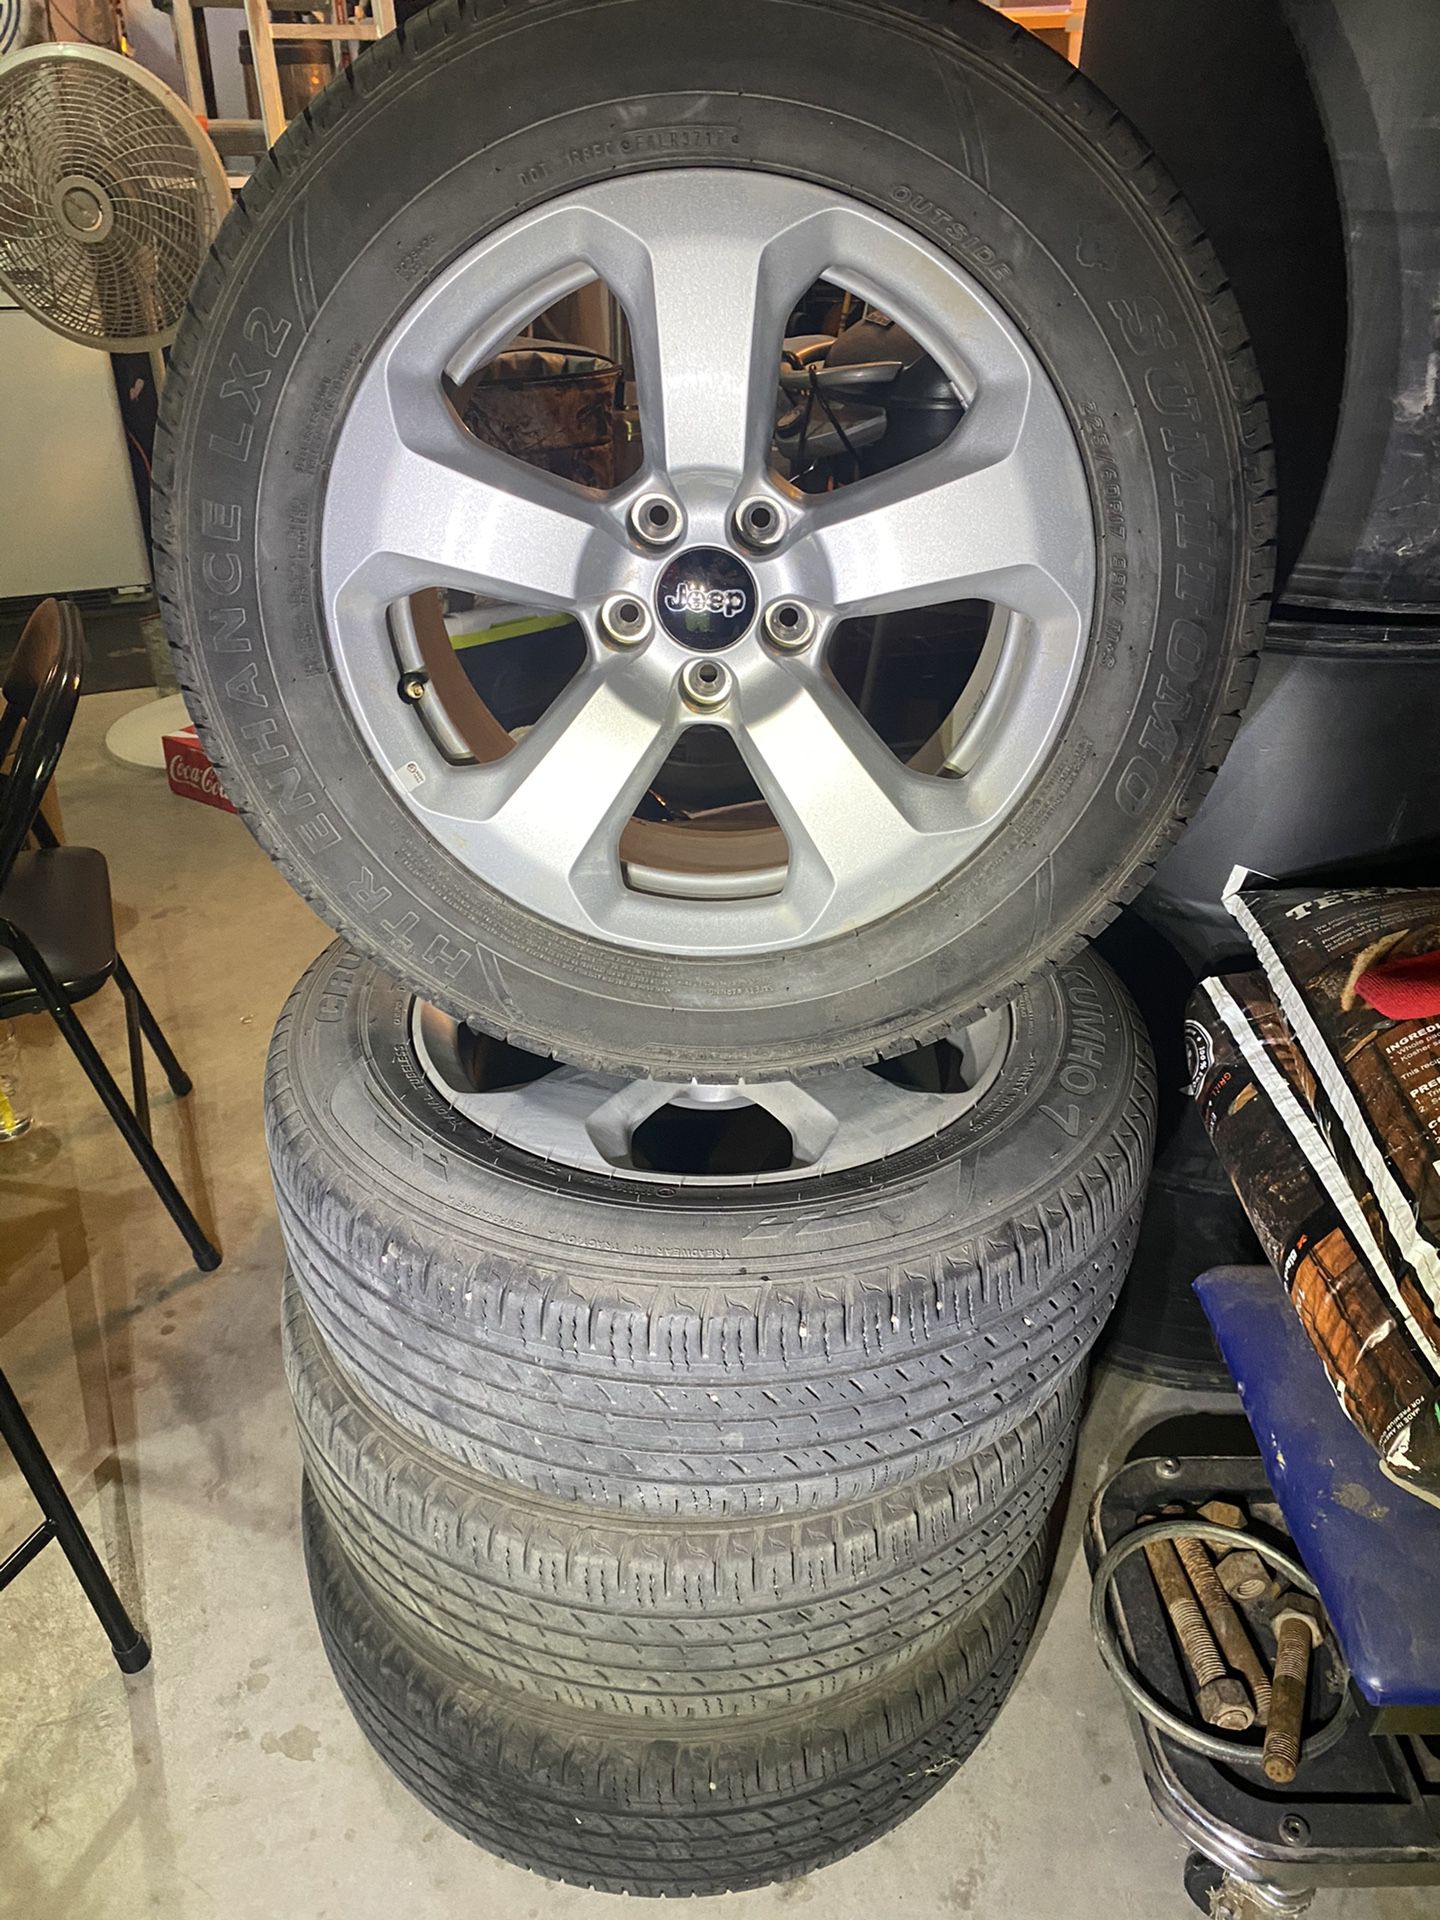 2019 Jeep latitude stock rims and tires